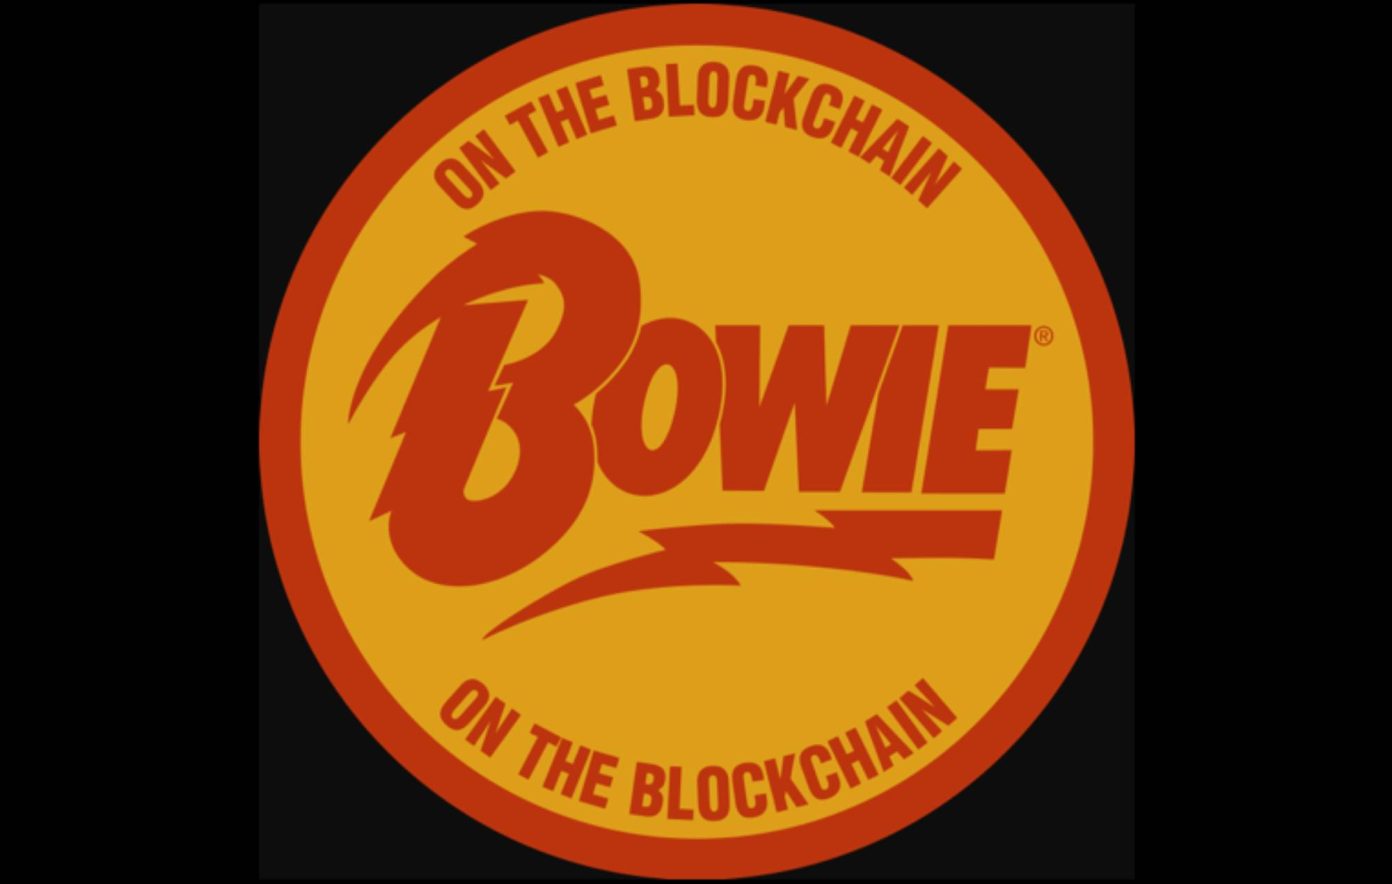 bowie-on-the-blockchain